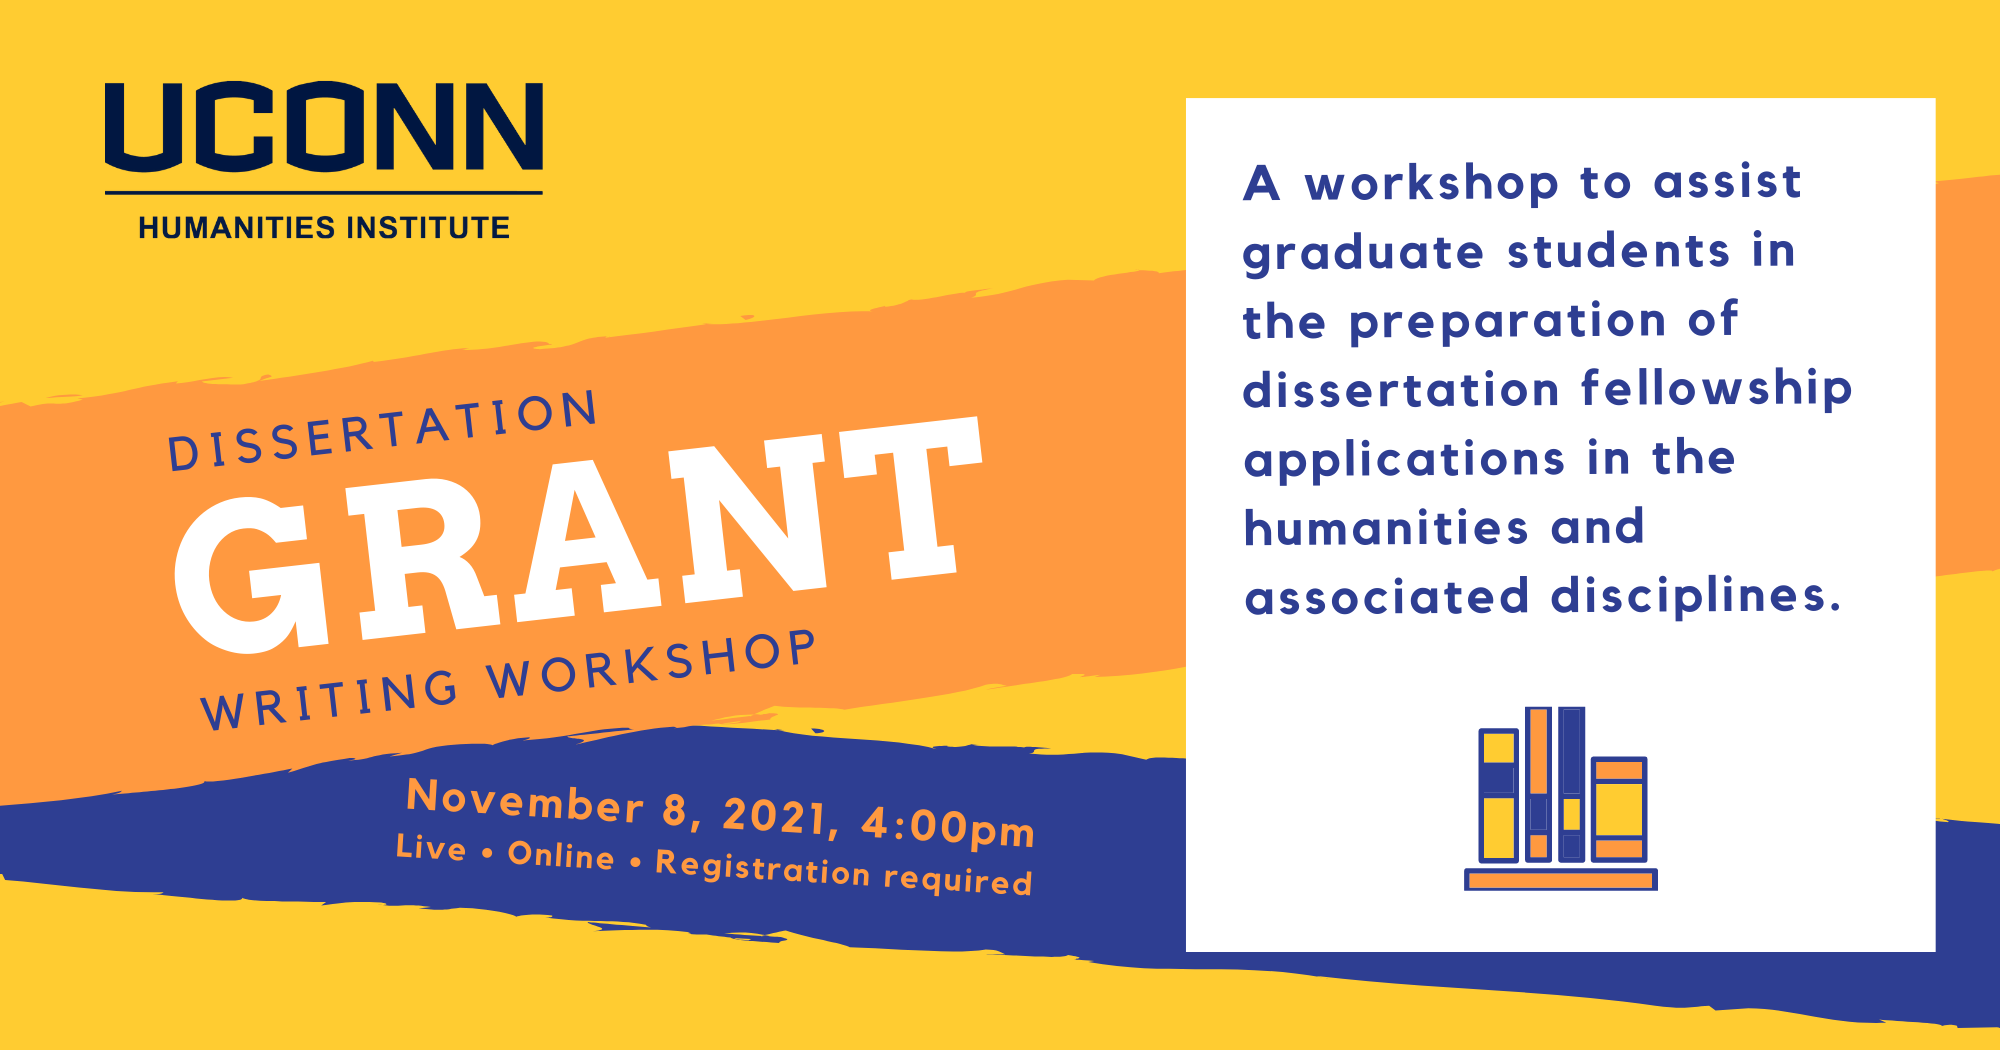 UConn Humanities Institute. Dissertation Grant writing workshop. November 8, 2021, 4:00pm. Live. Online. Registration required. A workshop to assist graduate students in the preparation of dissertation fellowship applications in the humanities and associated disciplines.